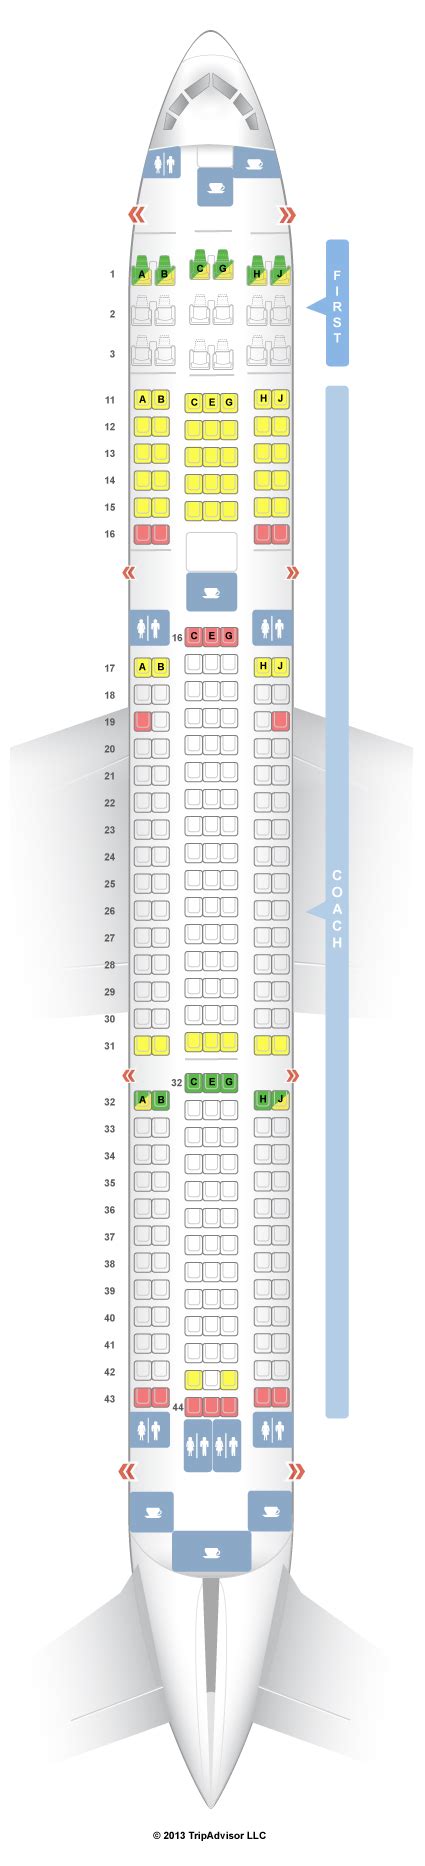 Seat Maps Cheap Flights Comparison Charts Sign in with Facebook Airlines Hawaiian Airlines Hawaiian Airlines (HA) Compare seat pitch, etc. Find your aircraft by flight number or route 12 Travelers Photos Hawaiian Airlines (HA) is the premiere airline for travel to the Hawaiian Islands. . 